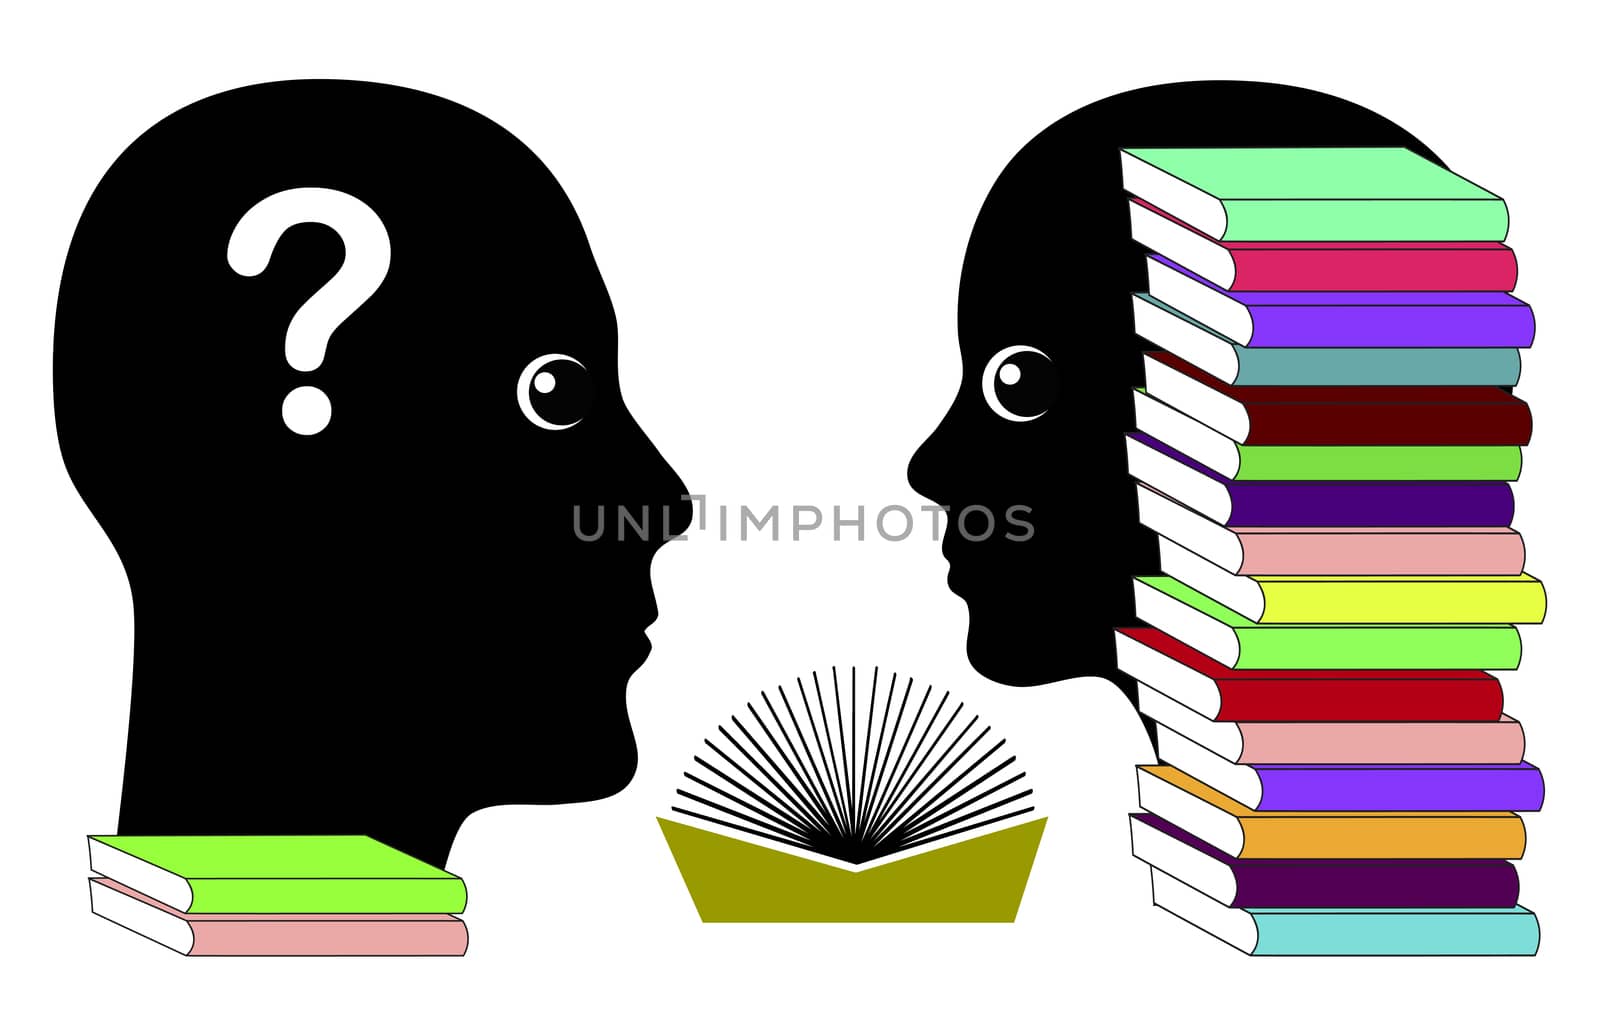 Difference in reading habits, women are bookworms while men are unwilling readers